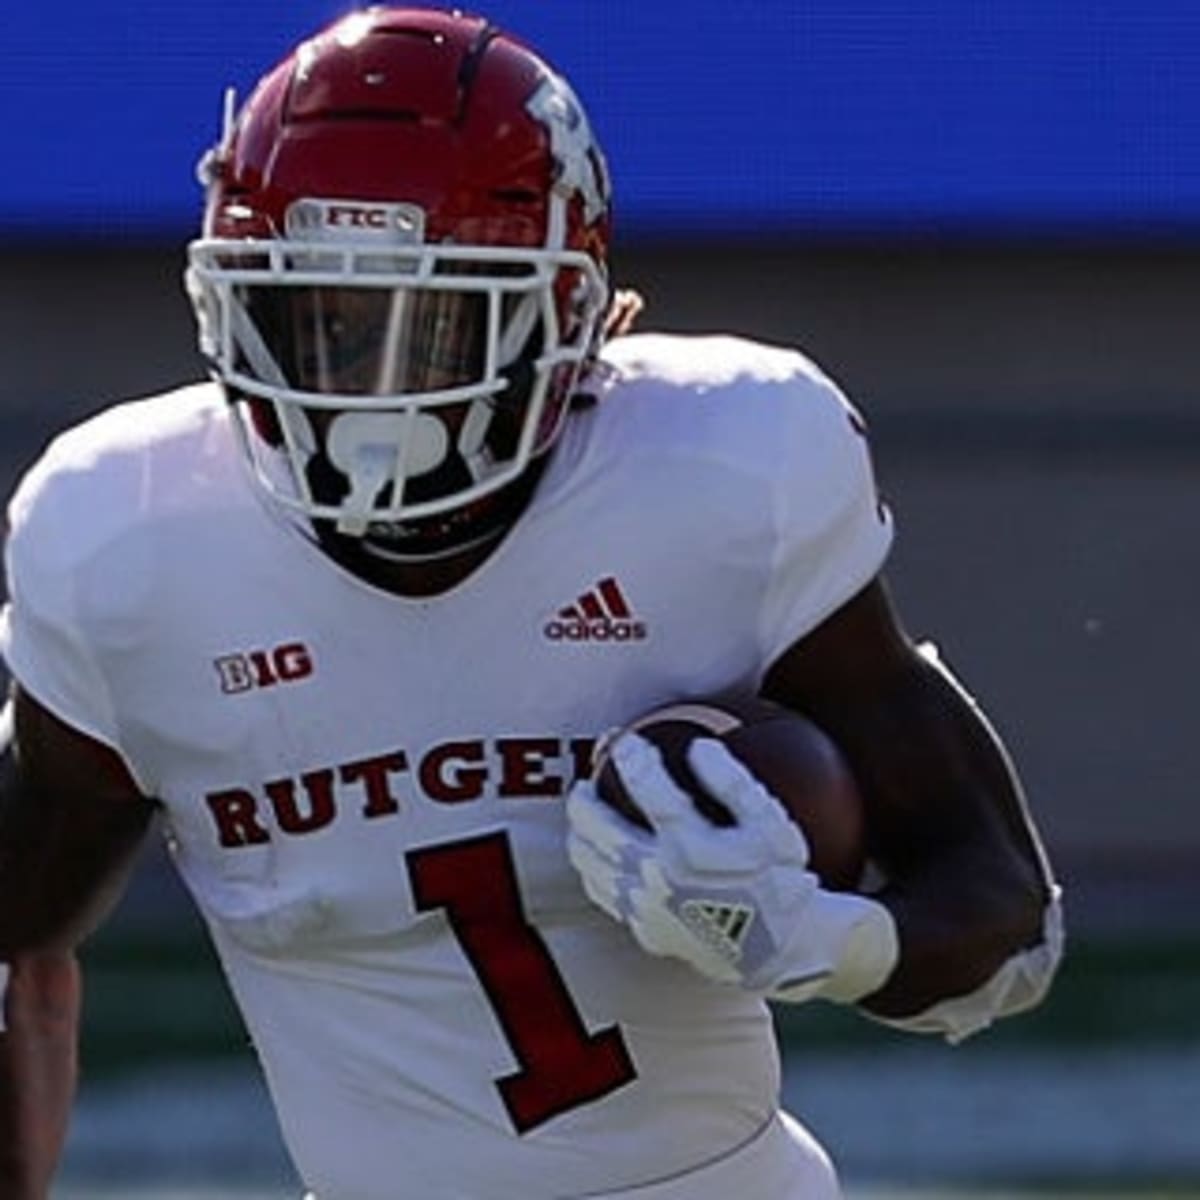 NFL Draft: Rutgers RB Intends to declare for the 2022 NFL Draft